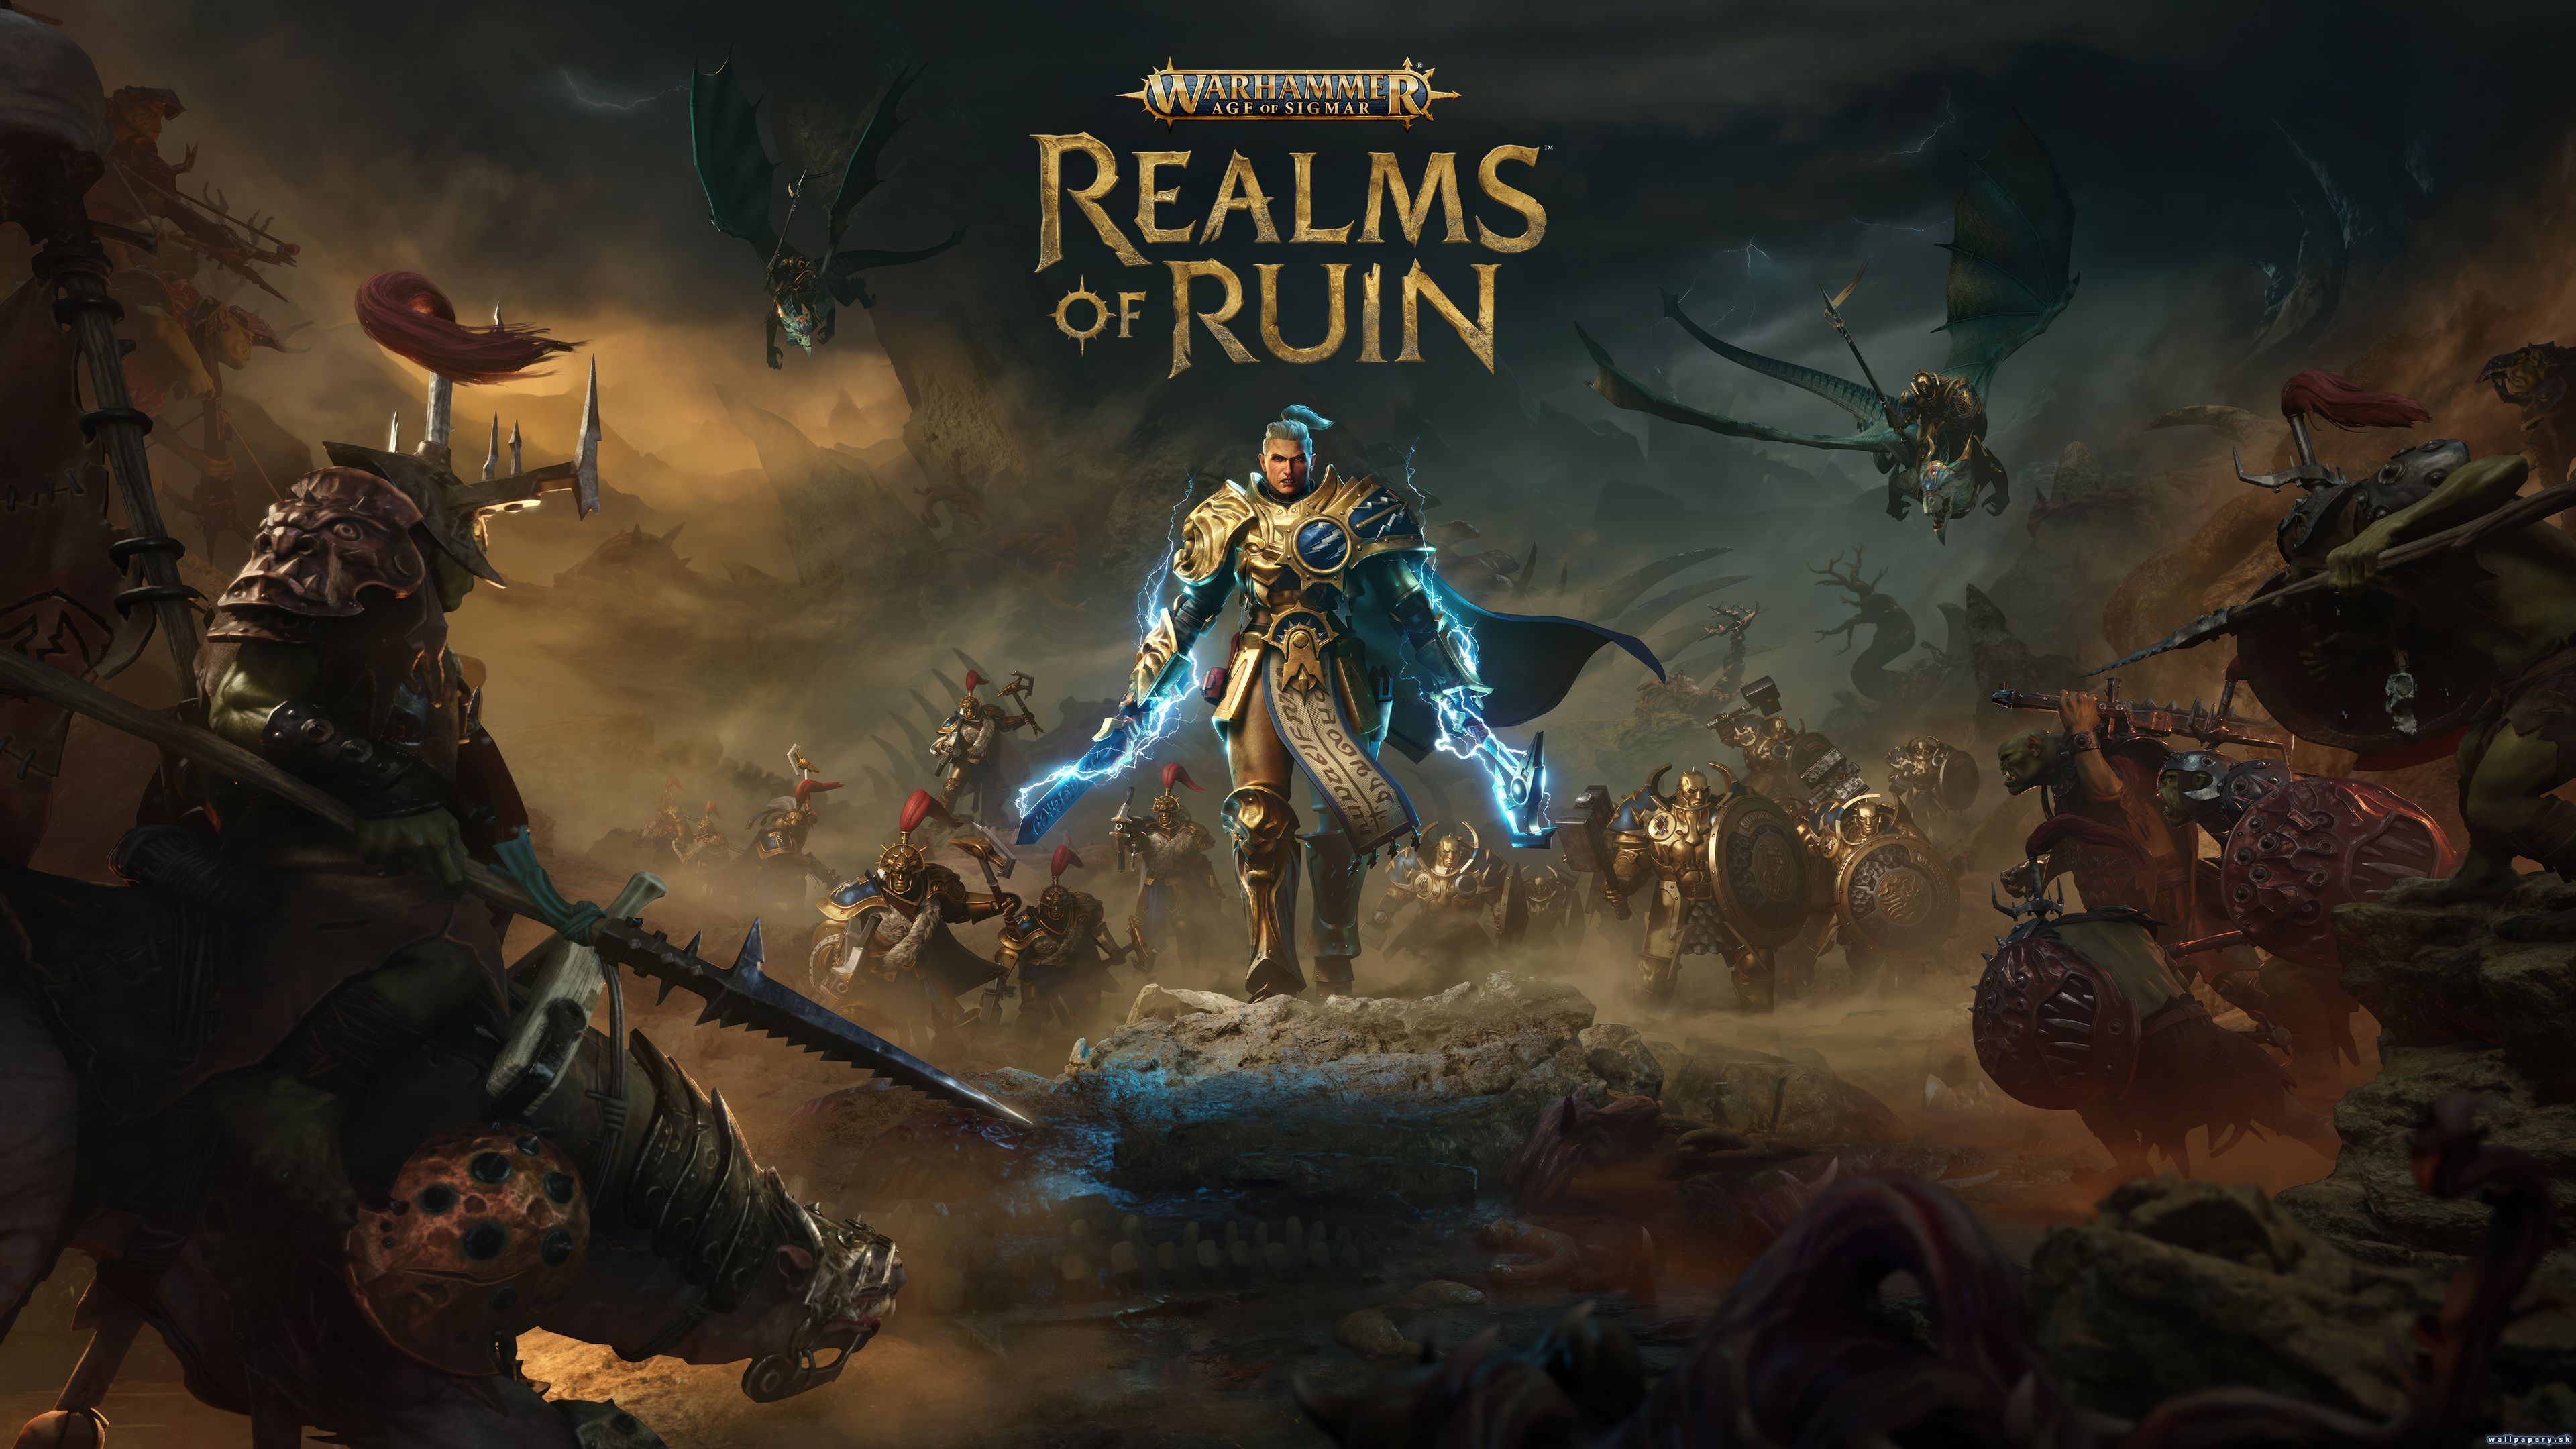 Warhammer Age of Sigmar: Realms of Ruin - wallpaper 1